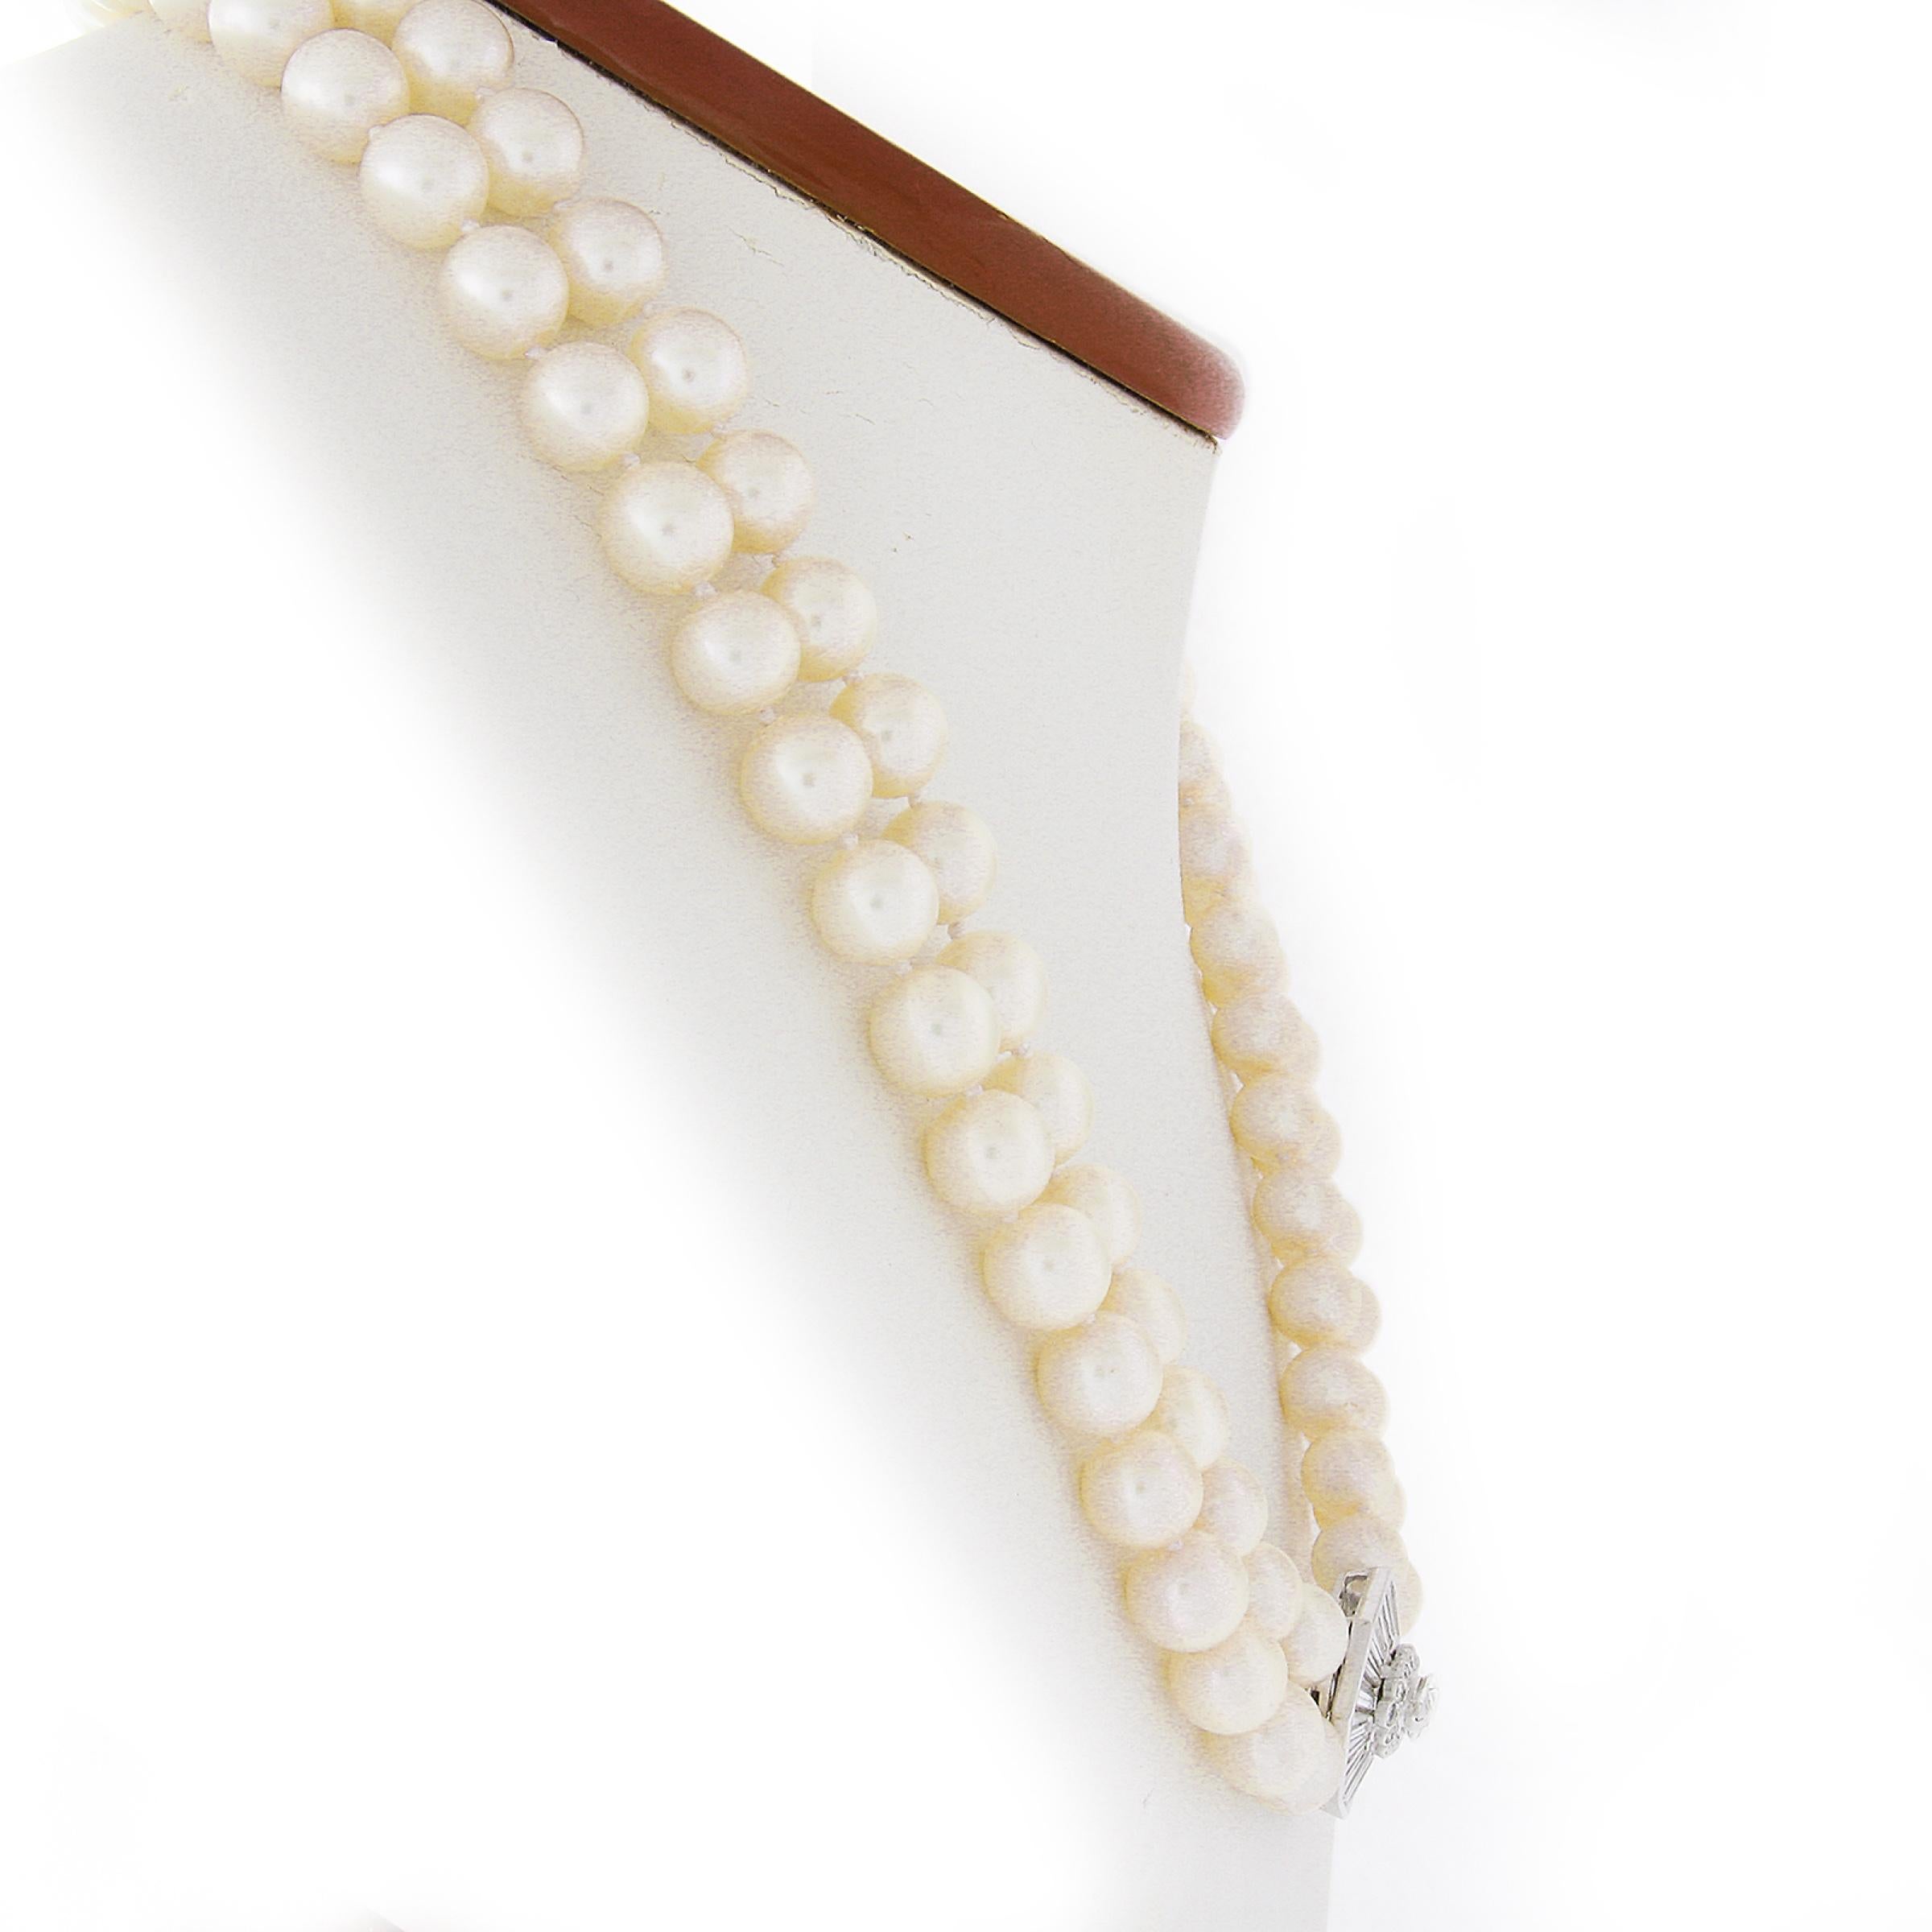 18k White Gold Dual Strand 8-8.5mm Pearl Necklace w/ GIA 3.68ctw Diamond Clasp In Good Condition For Sale In Montclair, NJ